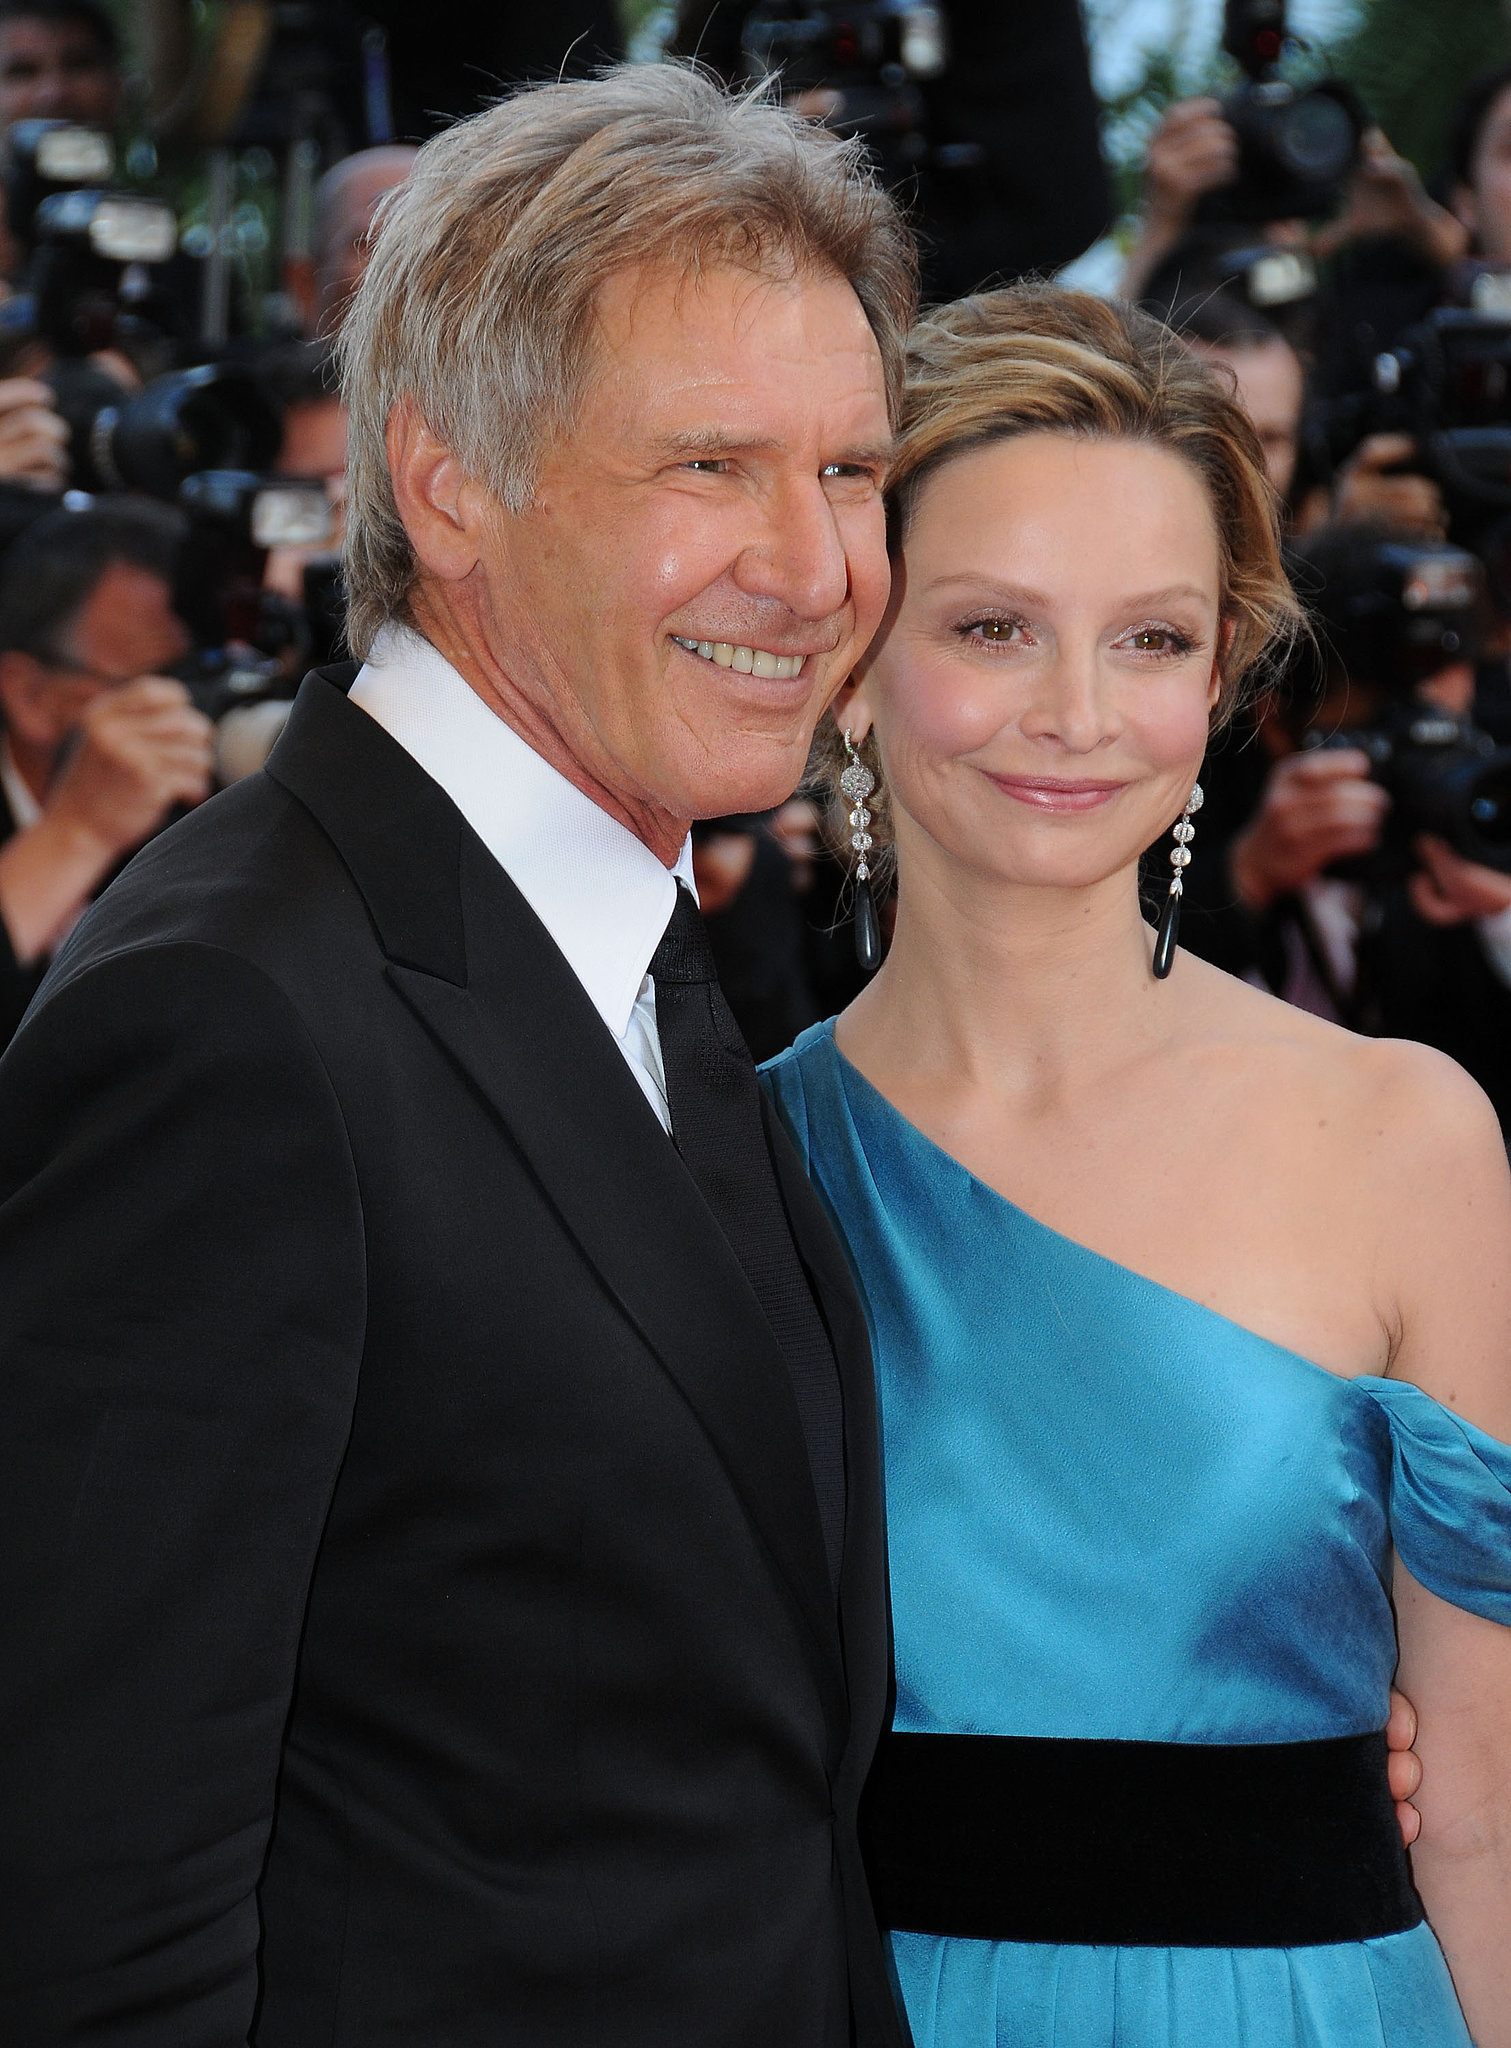 Are calista lockhart and harrison ford separated in 2008